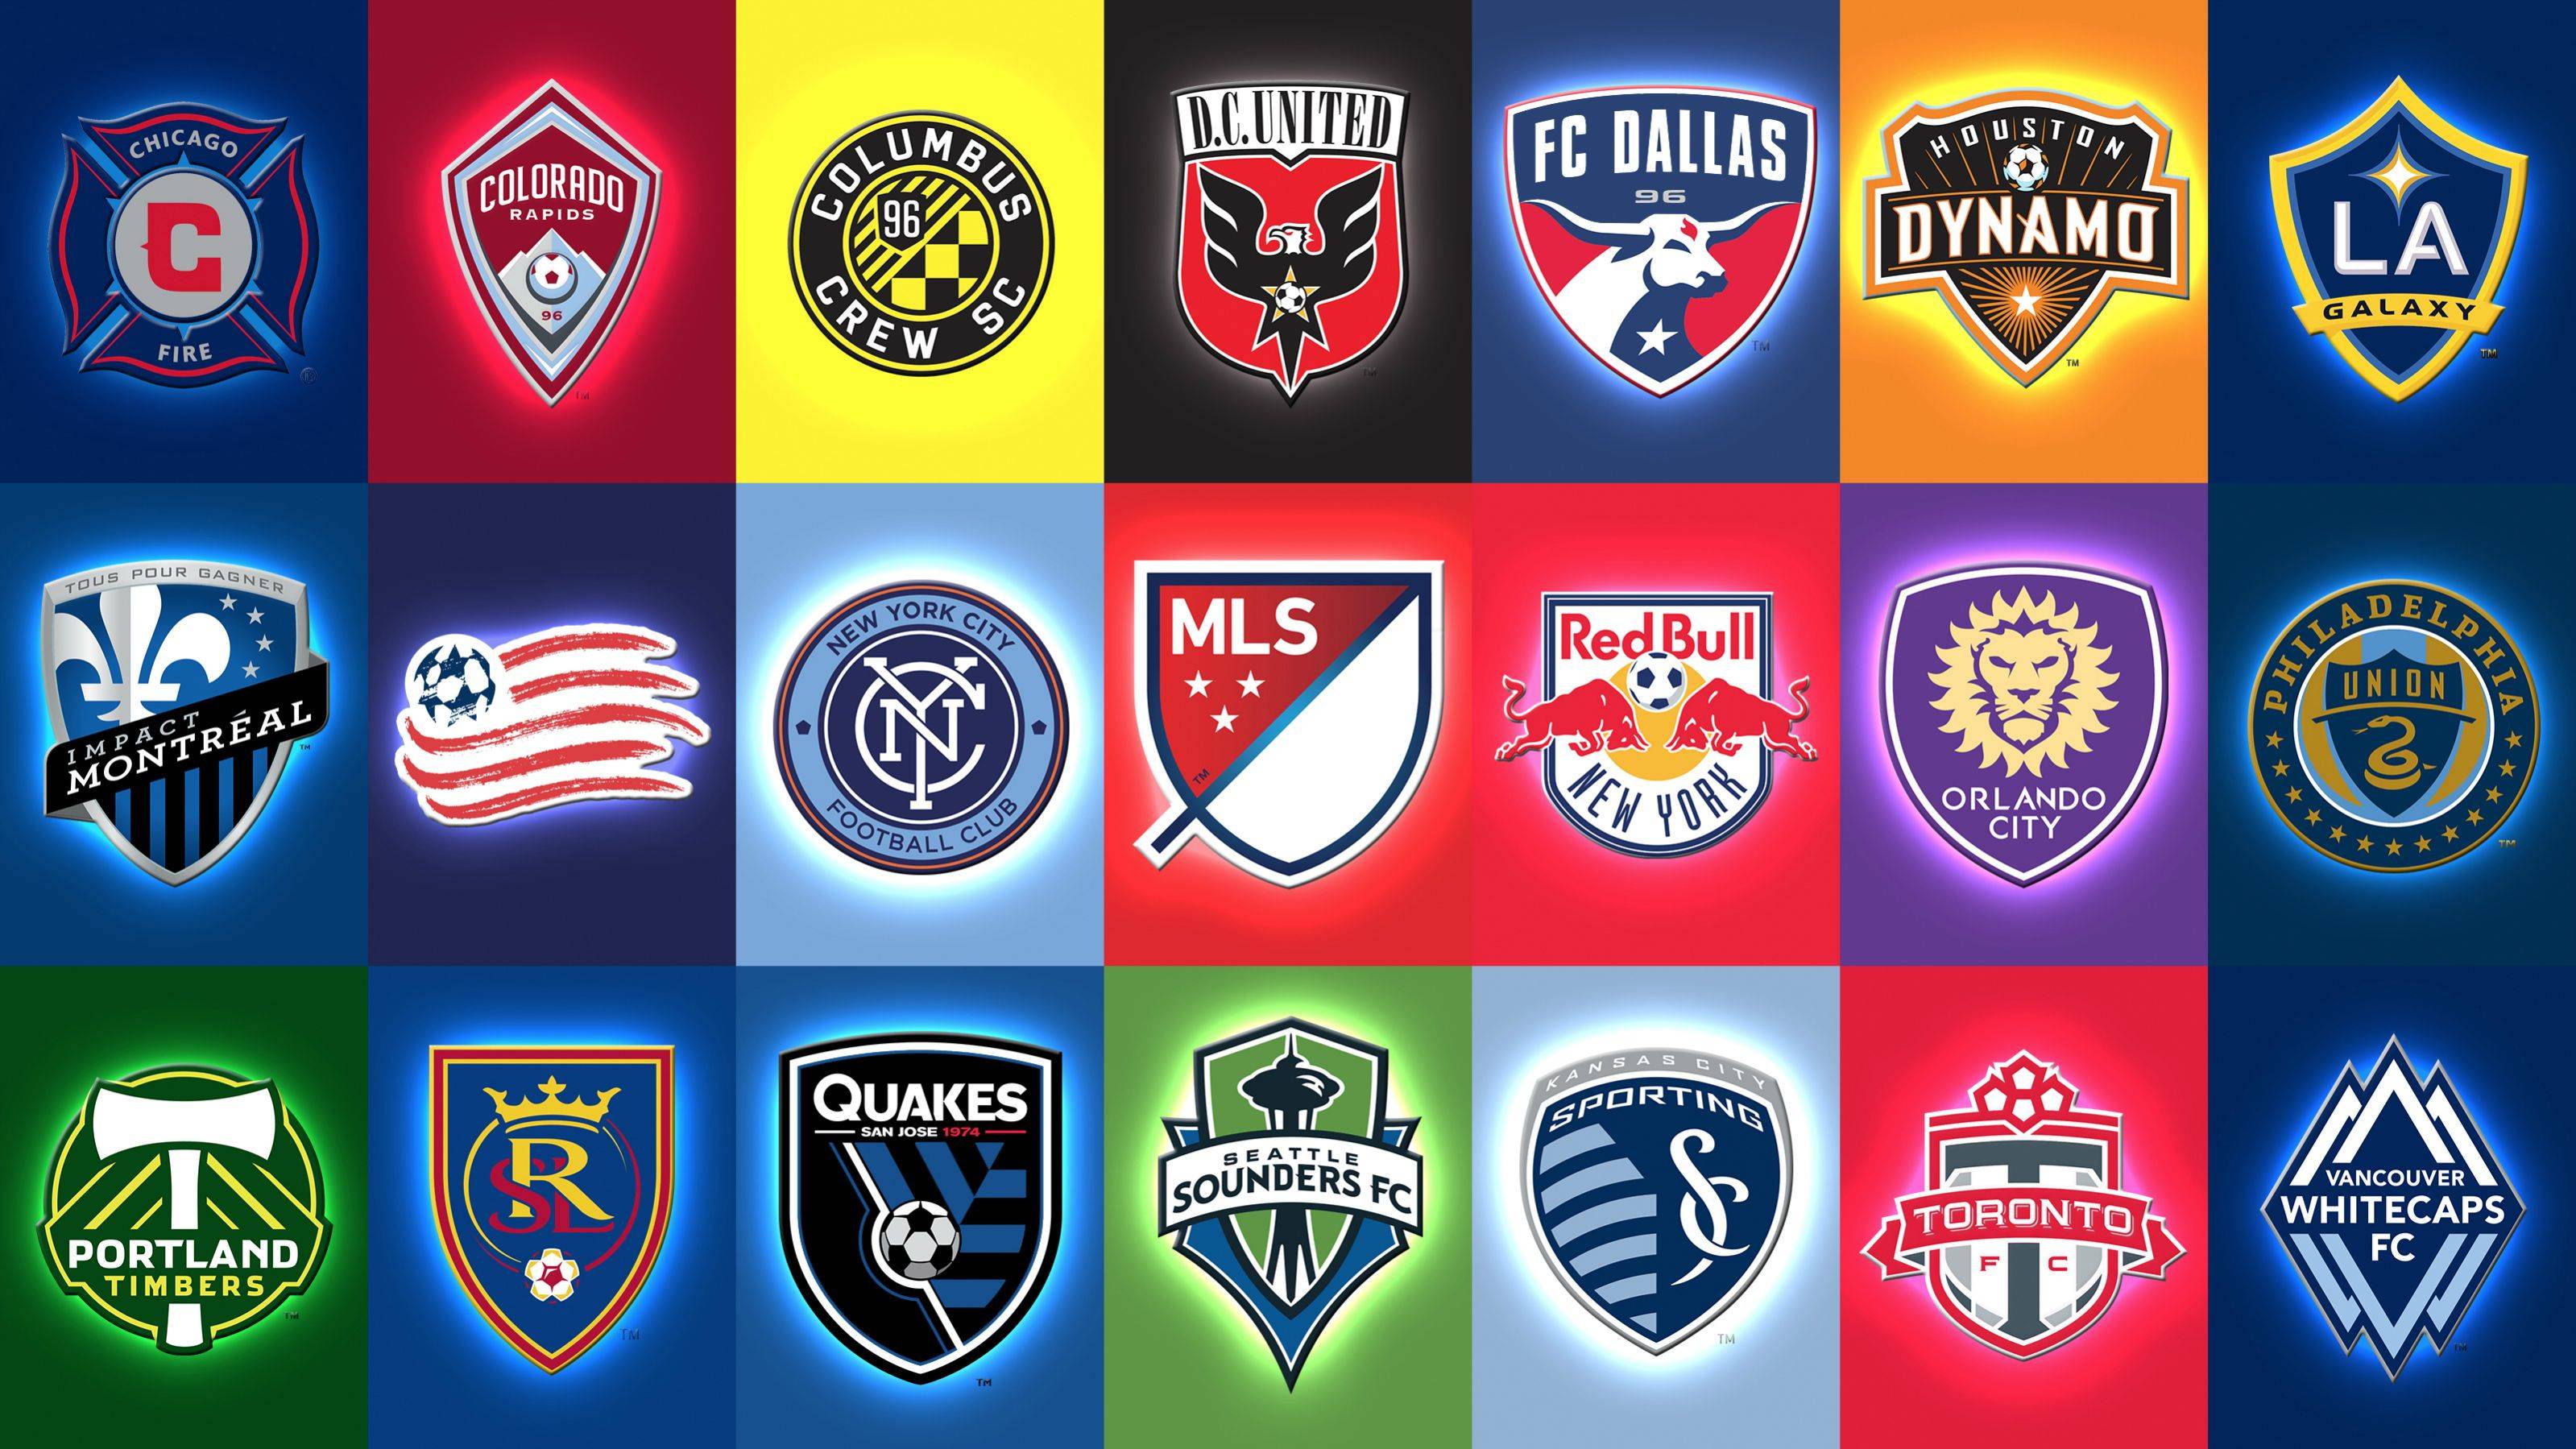 I made an MLS wallpaper because I&;m snowed in. You can use it if